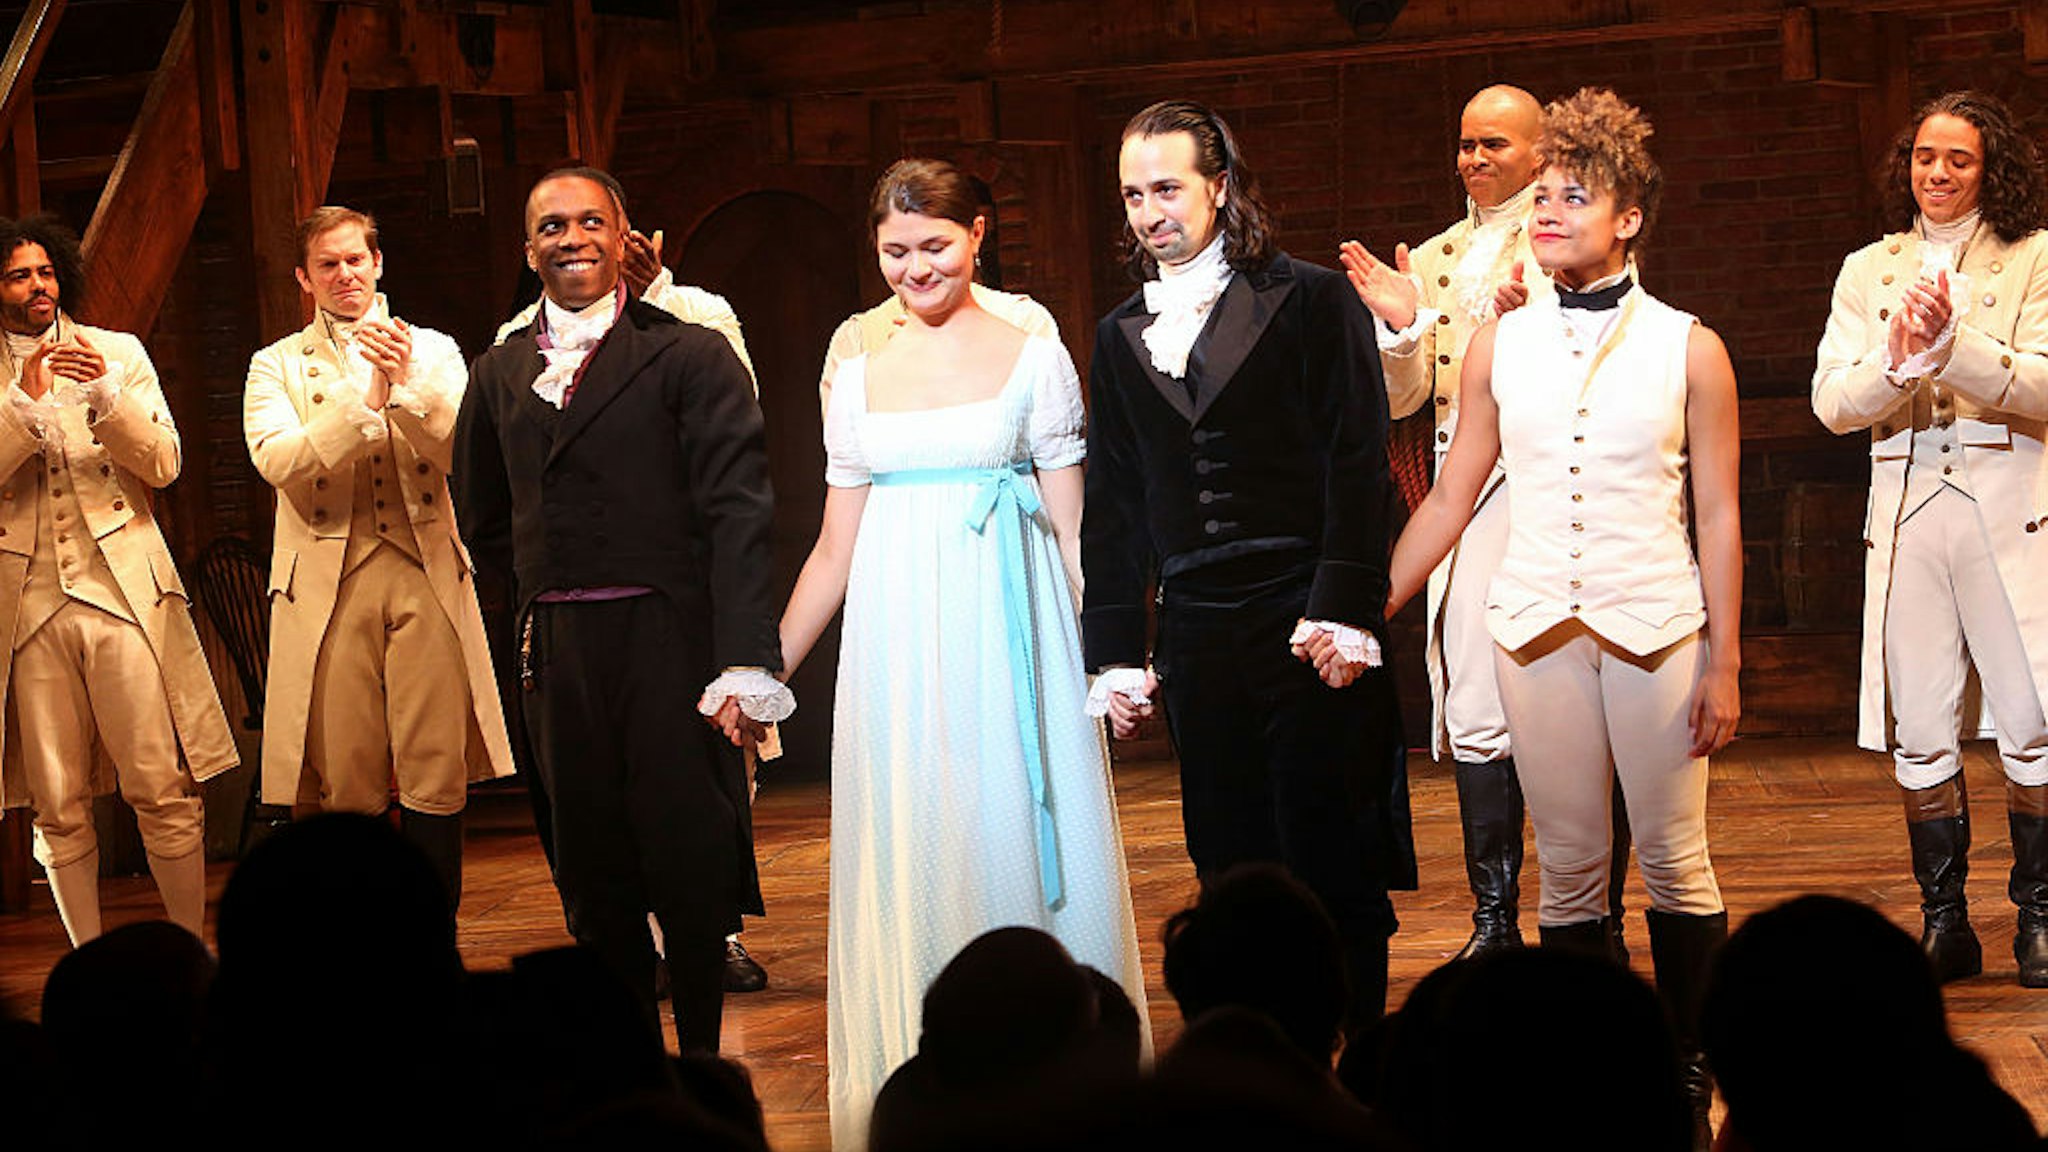 Lin-Manuel Miranda performs his final performance as "Alexander Hamilton" in "Hamilton" on Broadway at The Richard Rogers Theatre on July 9, 2016 in New York City.